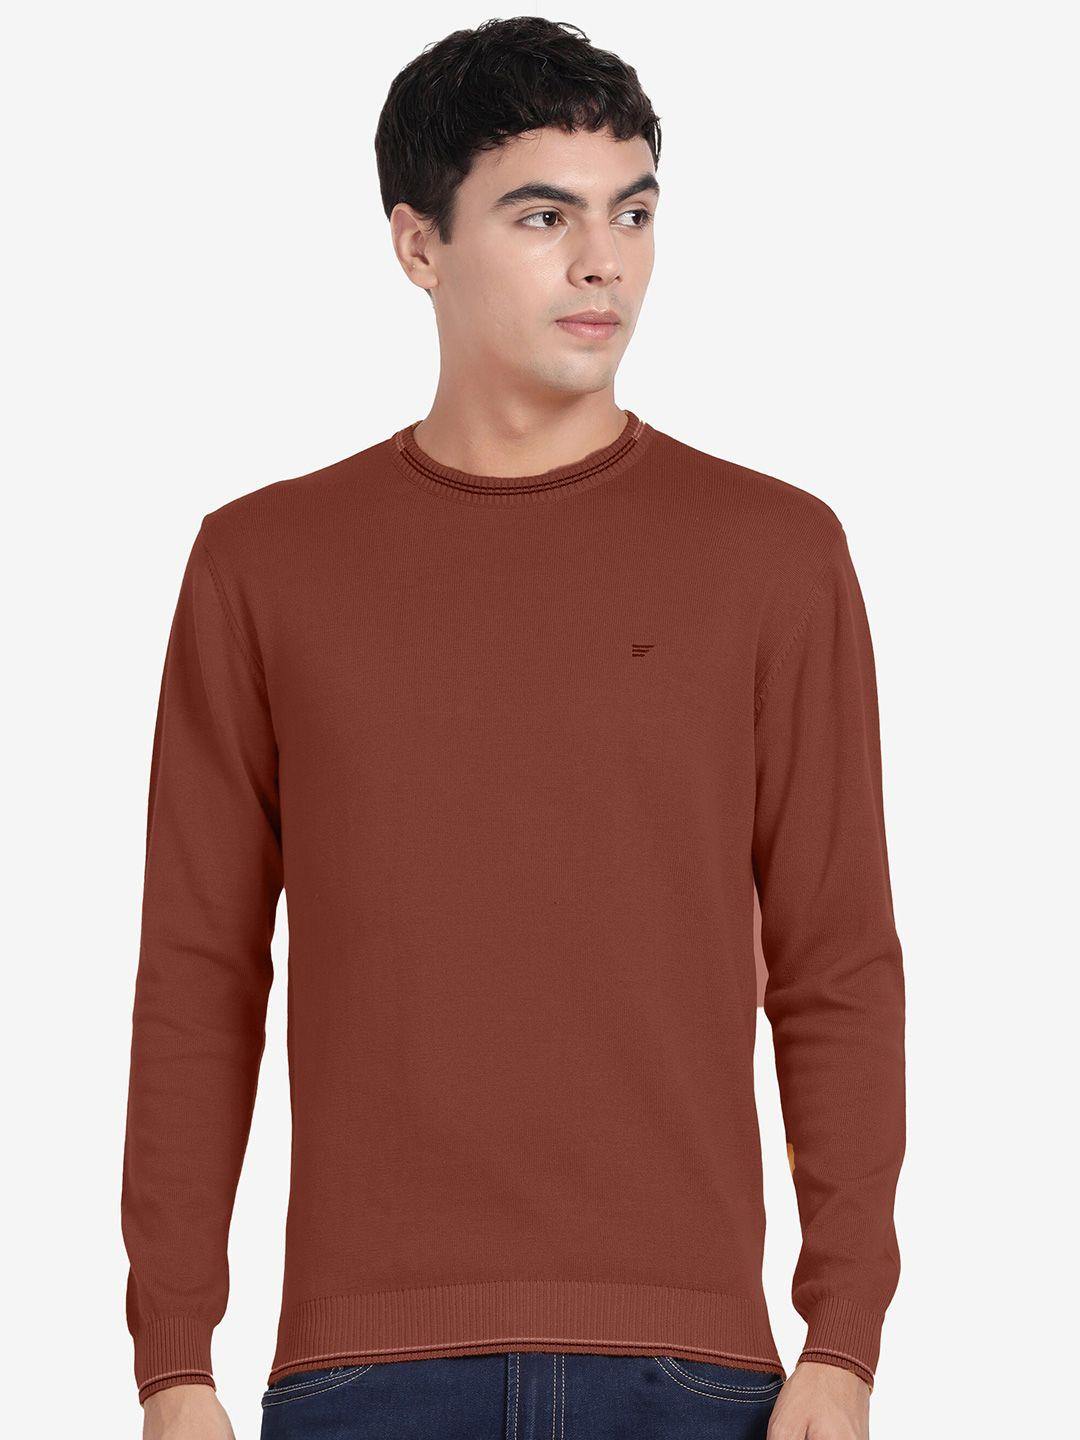 t-base round neck cotton pullover sweaters